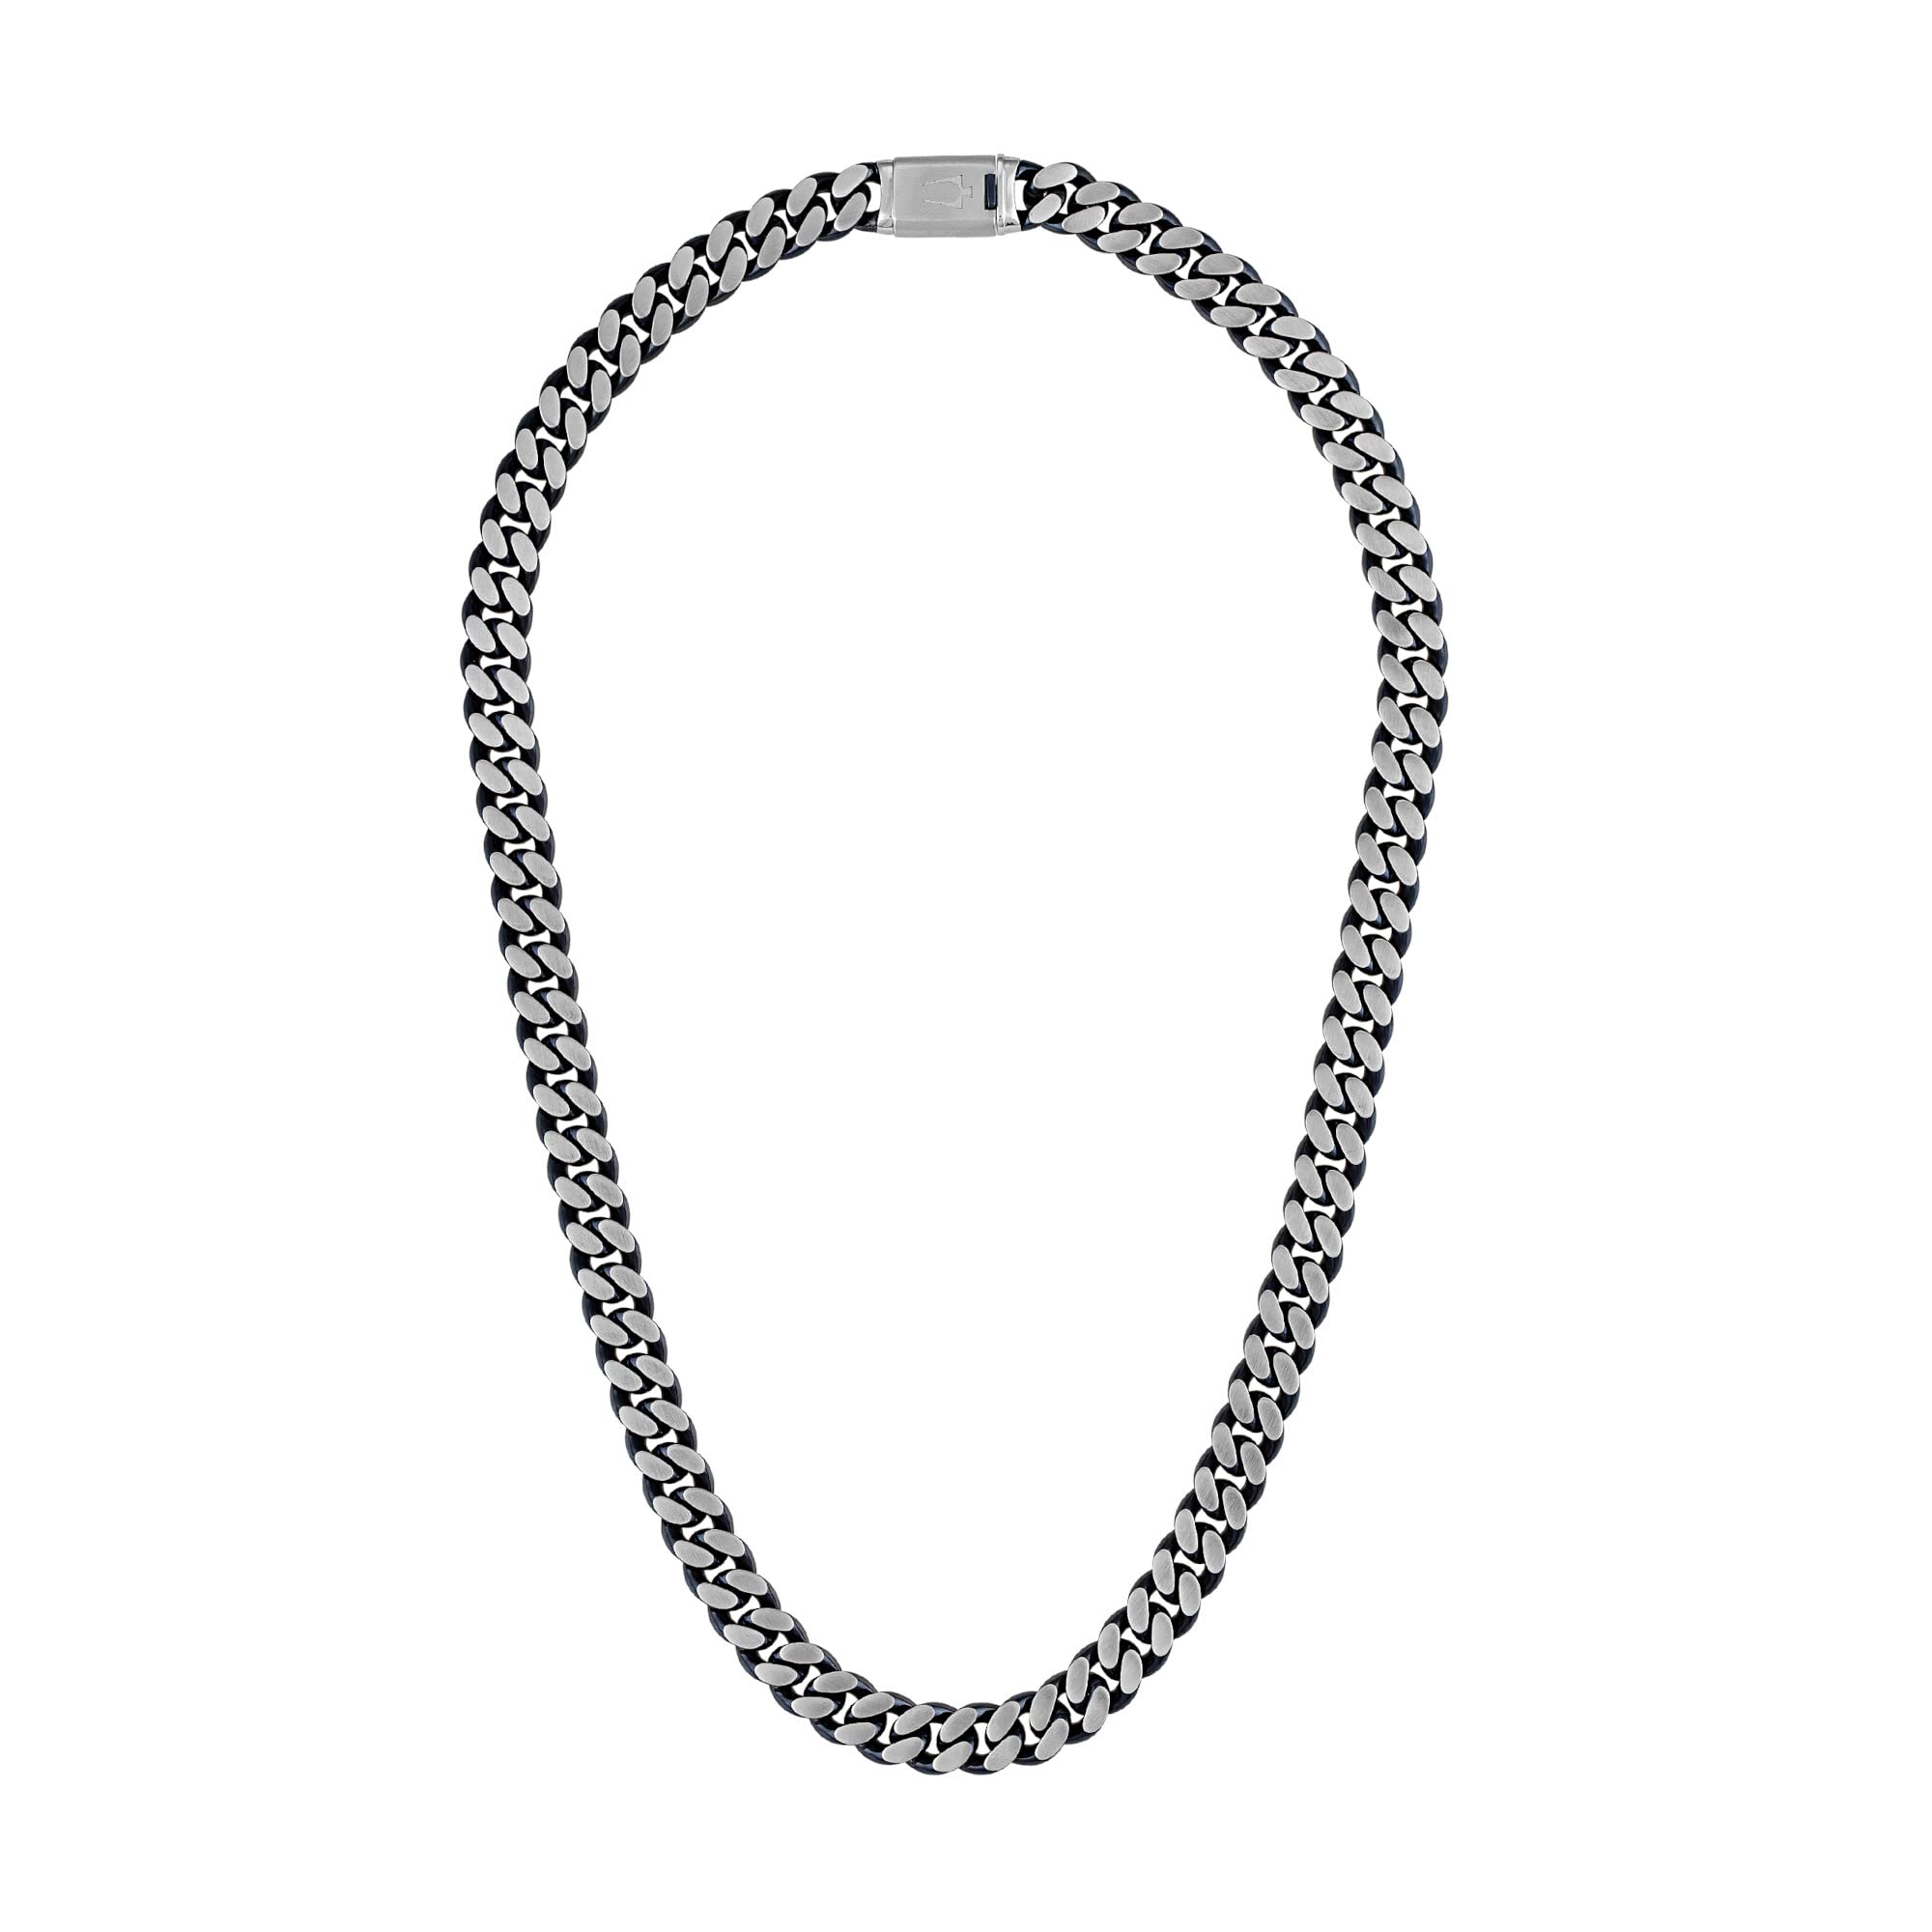 Bulova Men's Jewelry Classic Stainless Steel Curb Chain Necklace, 10mm, Length 24